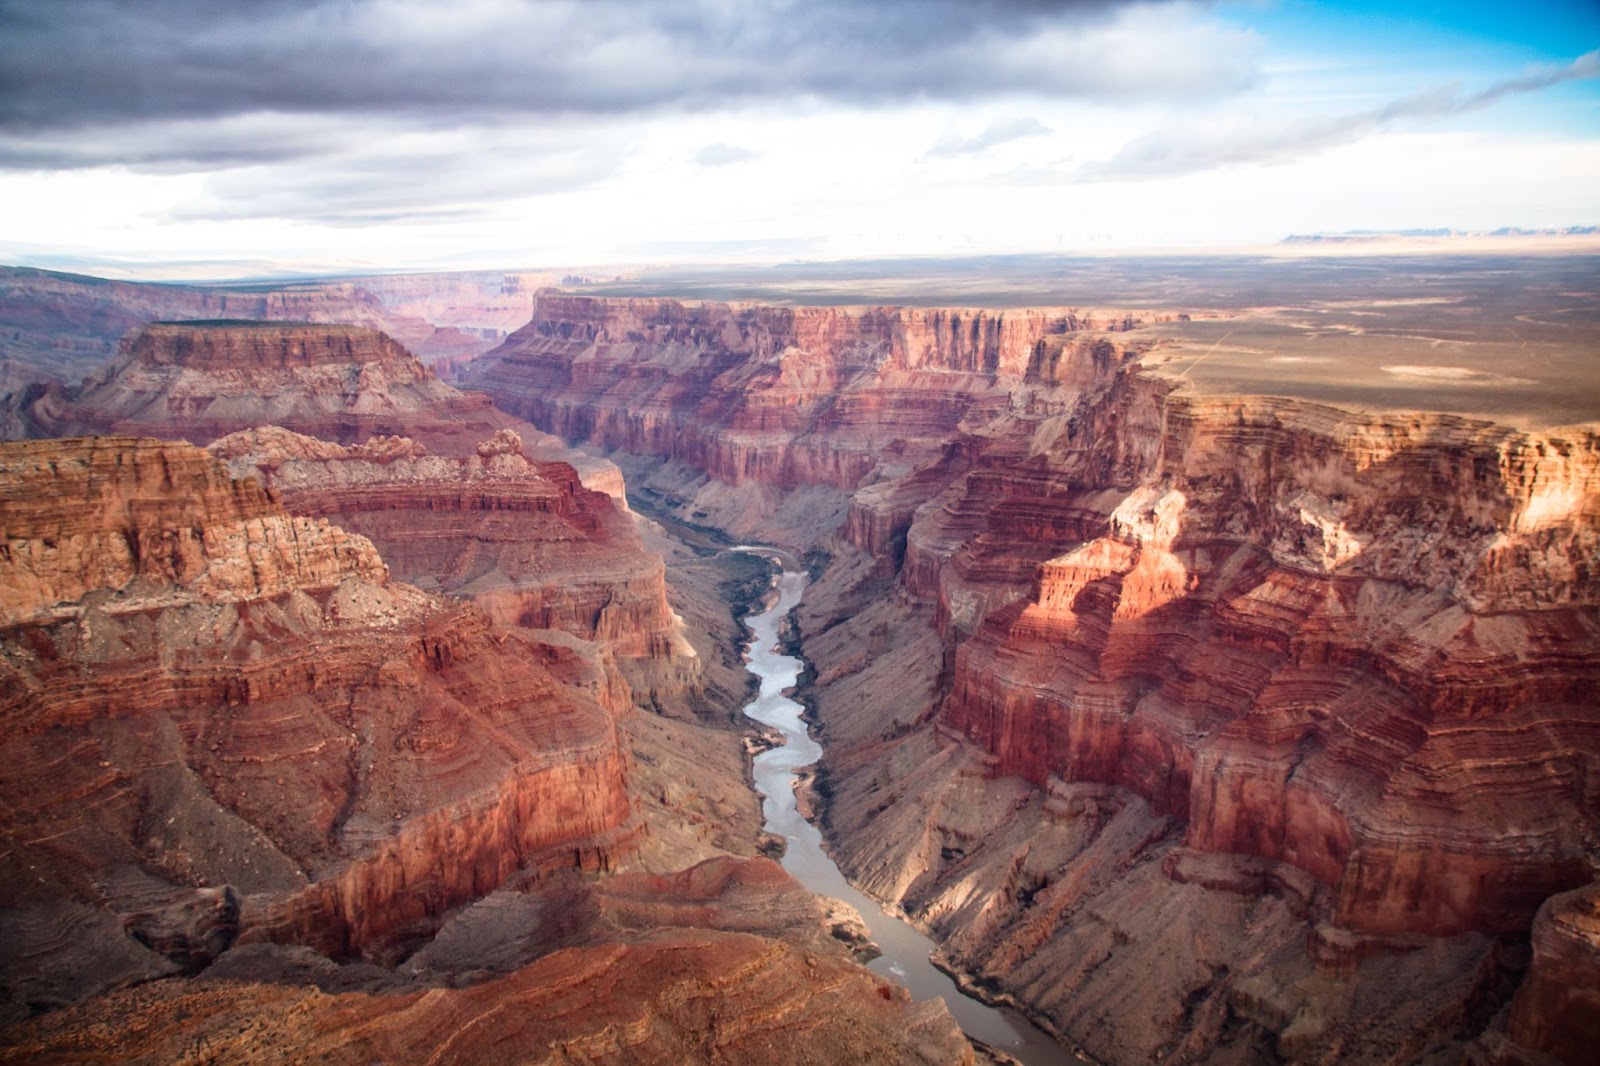 The Grand Canyon, USA - 23 Top Sights to See Before You Die